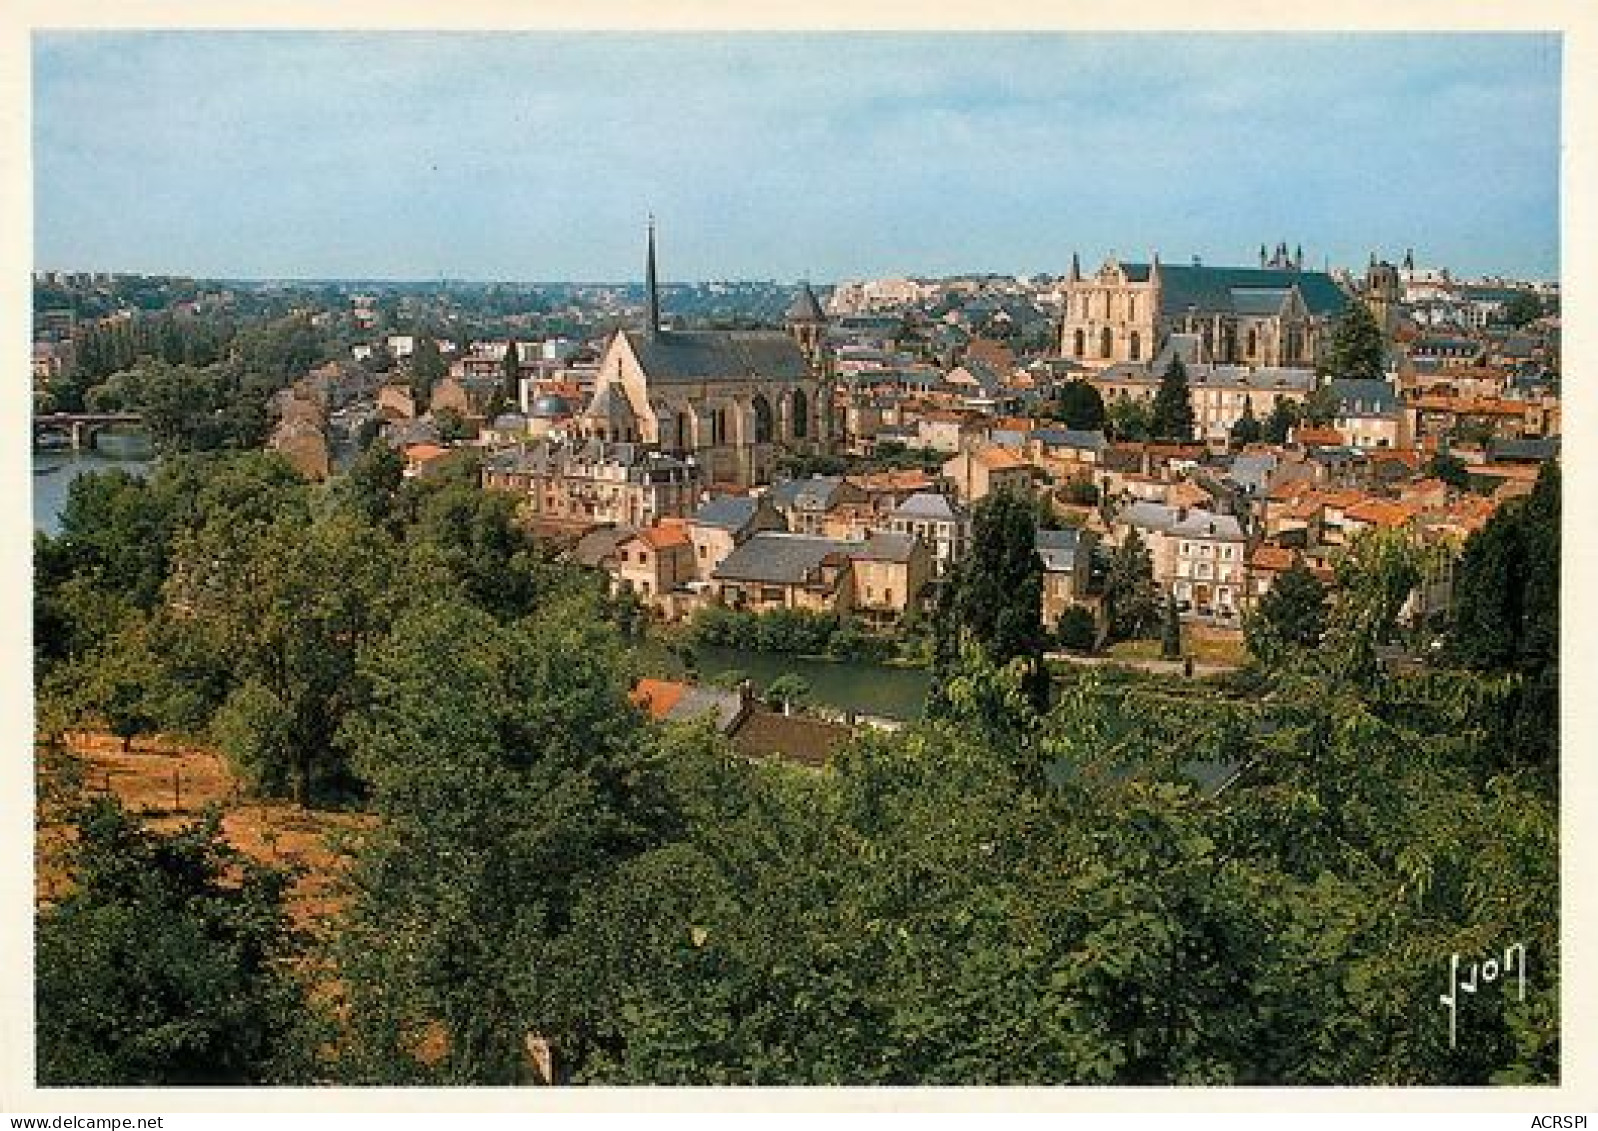  POITIERS  Vue Panoramique  4   (scan Recto-verso)MA2166Bis - Poitiers